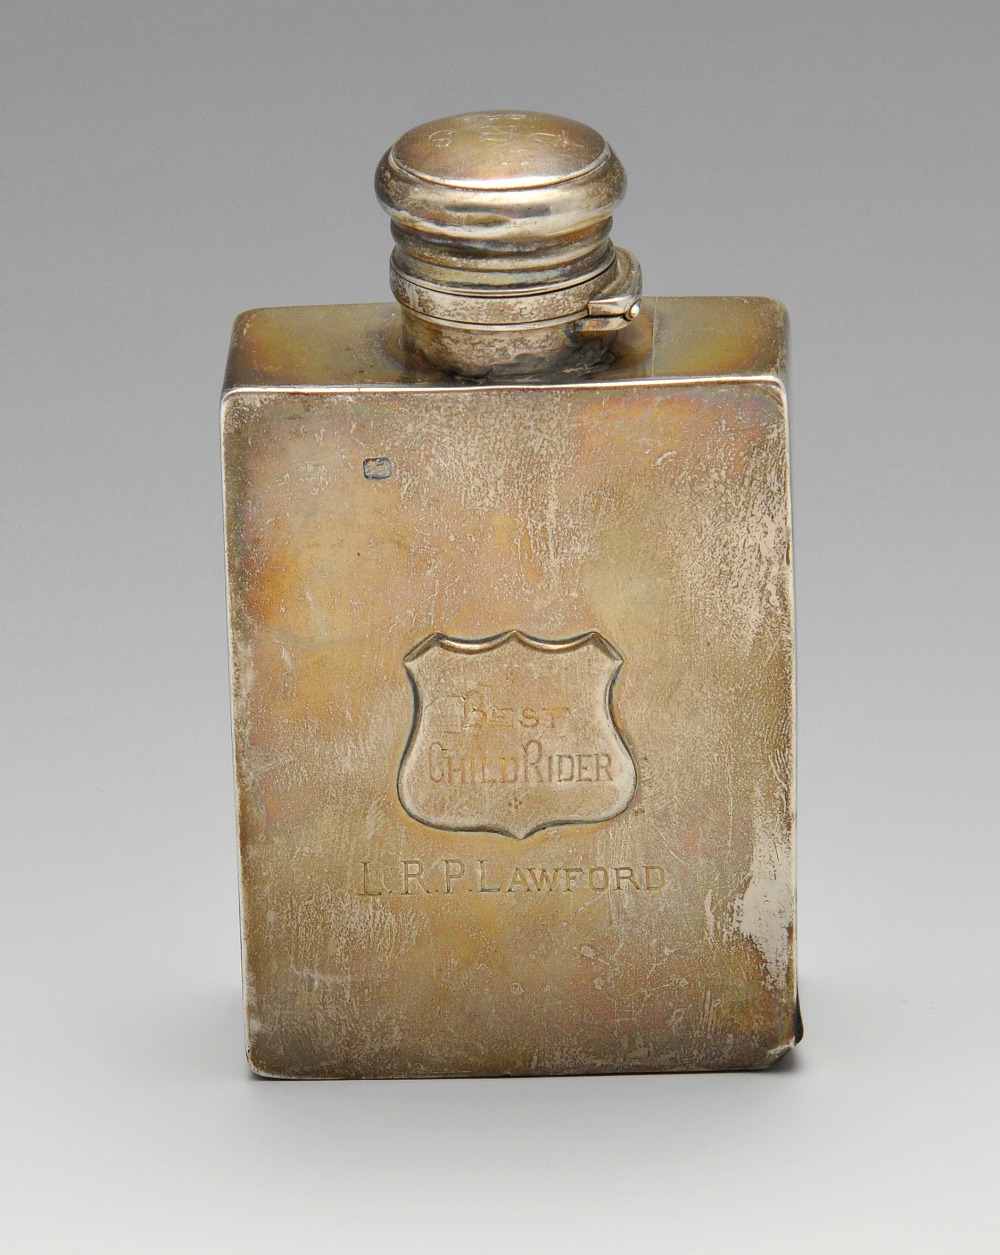 A Victorian silver hip flask, the oblong form with applied shield, personal inscription and hinged